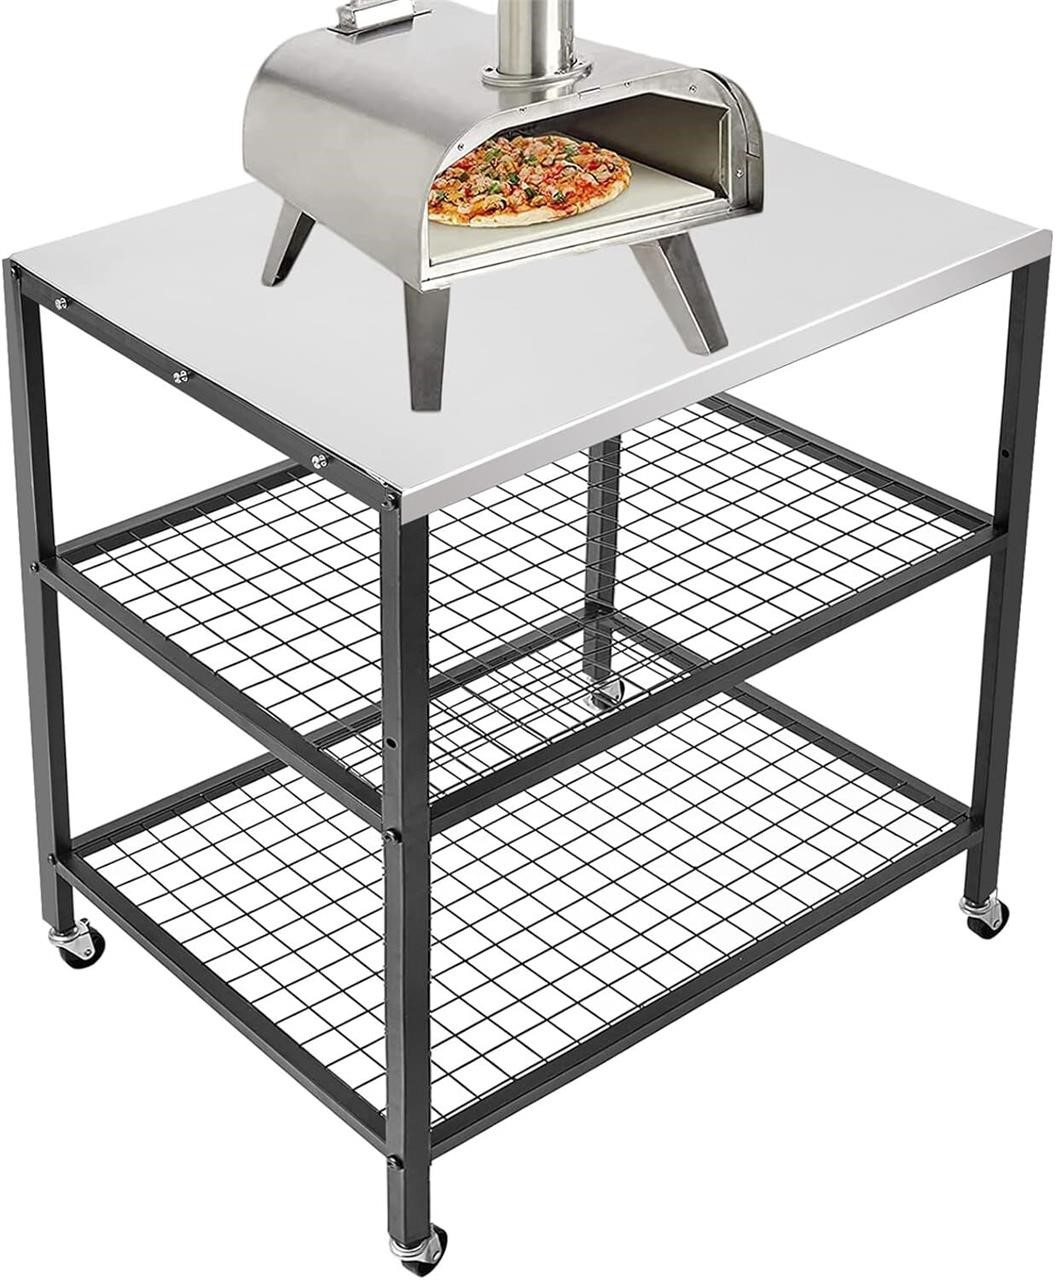 WEASHUME Grill Cart 31.52435.5